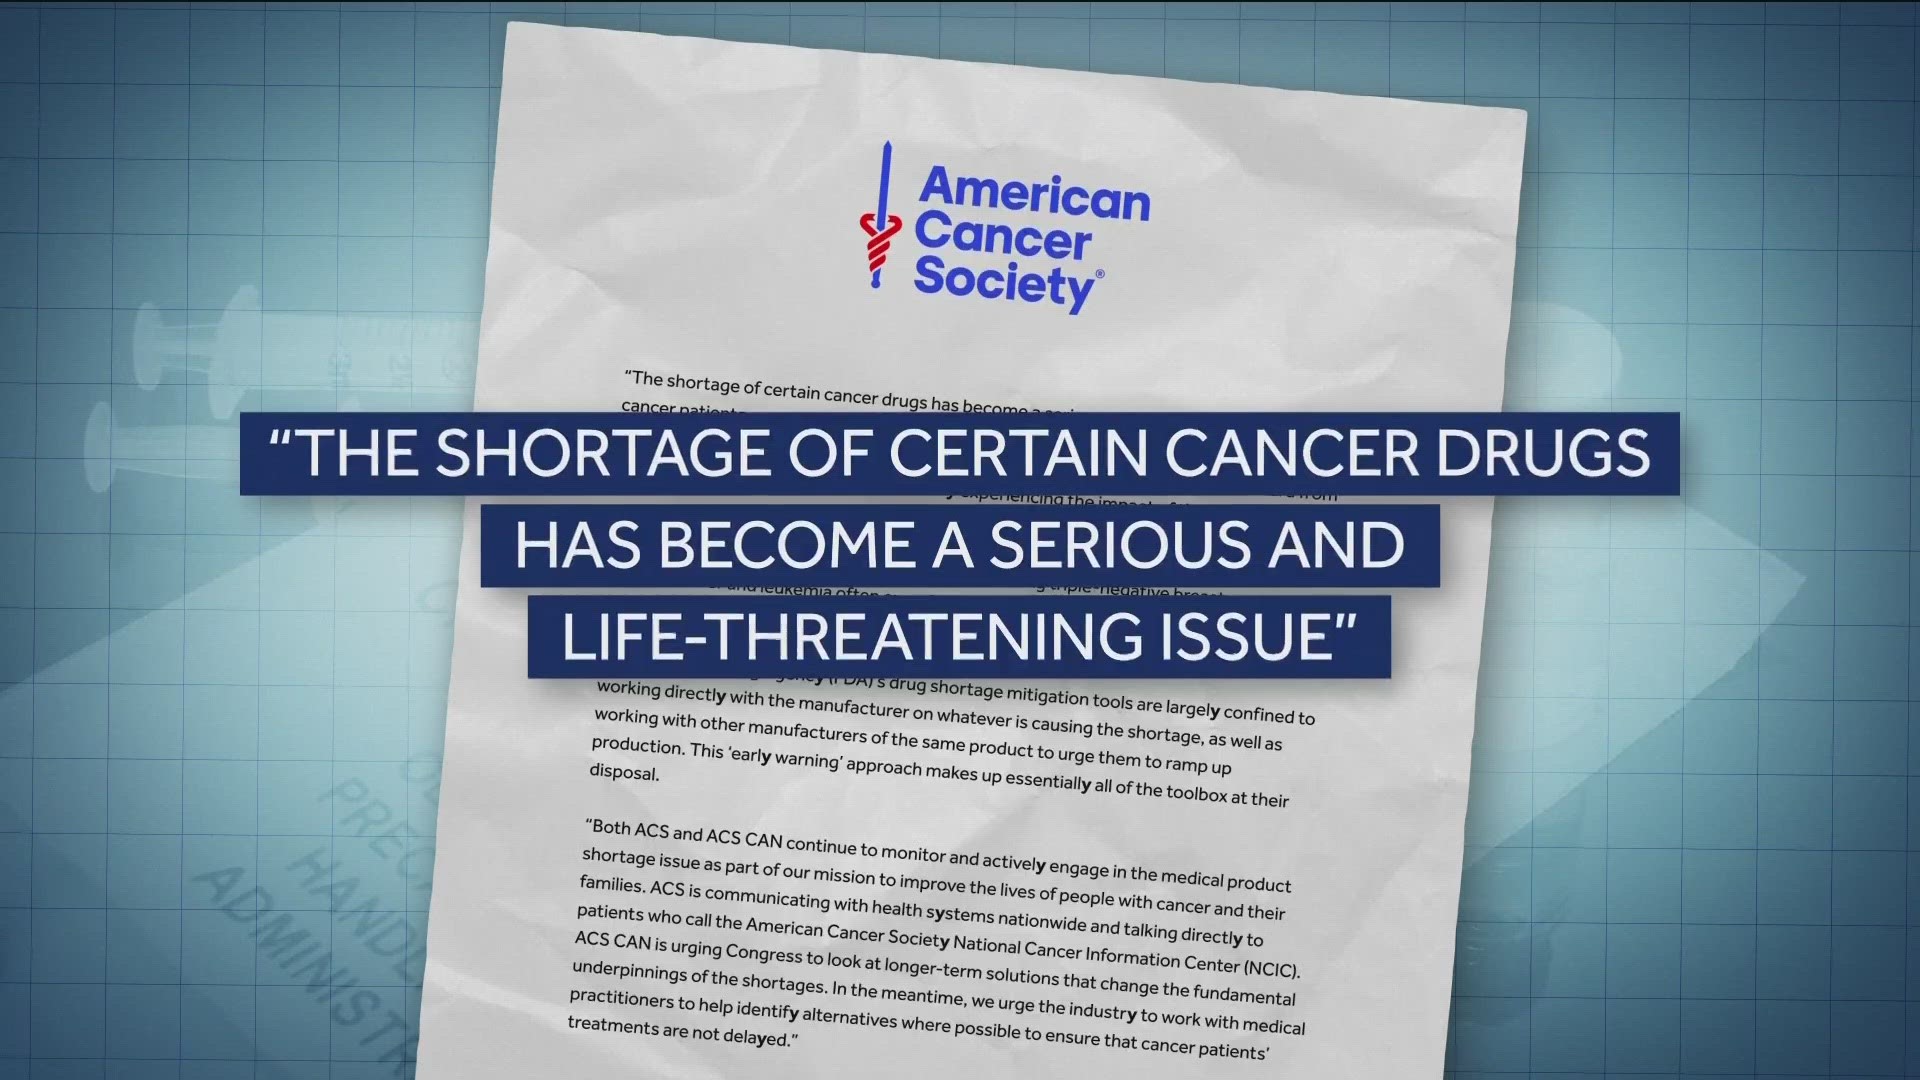 Fourteen cancer drugs are in shortage, according to the Food and Drug Administration.